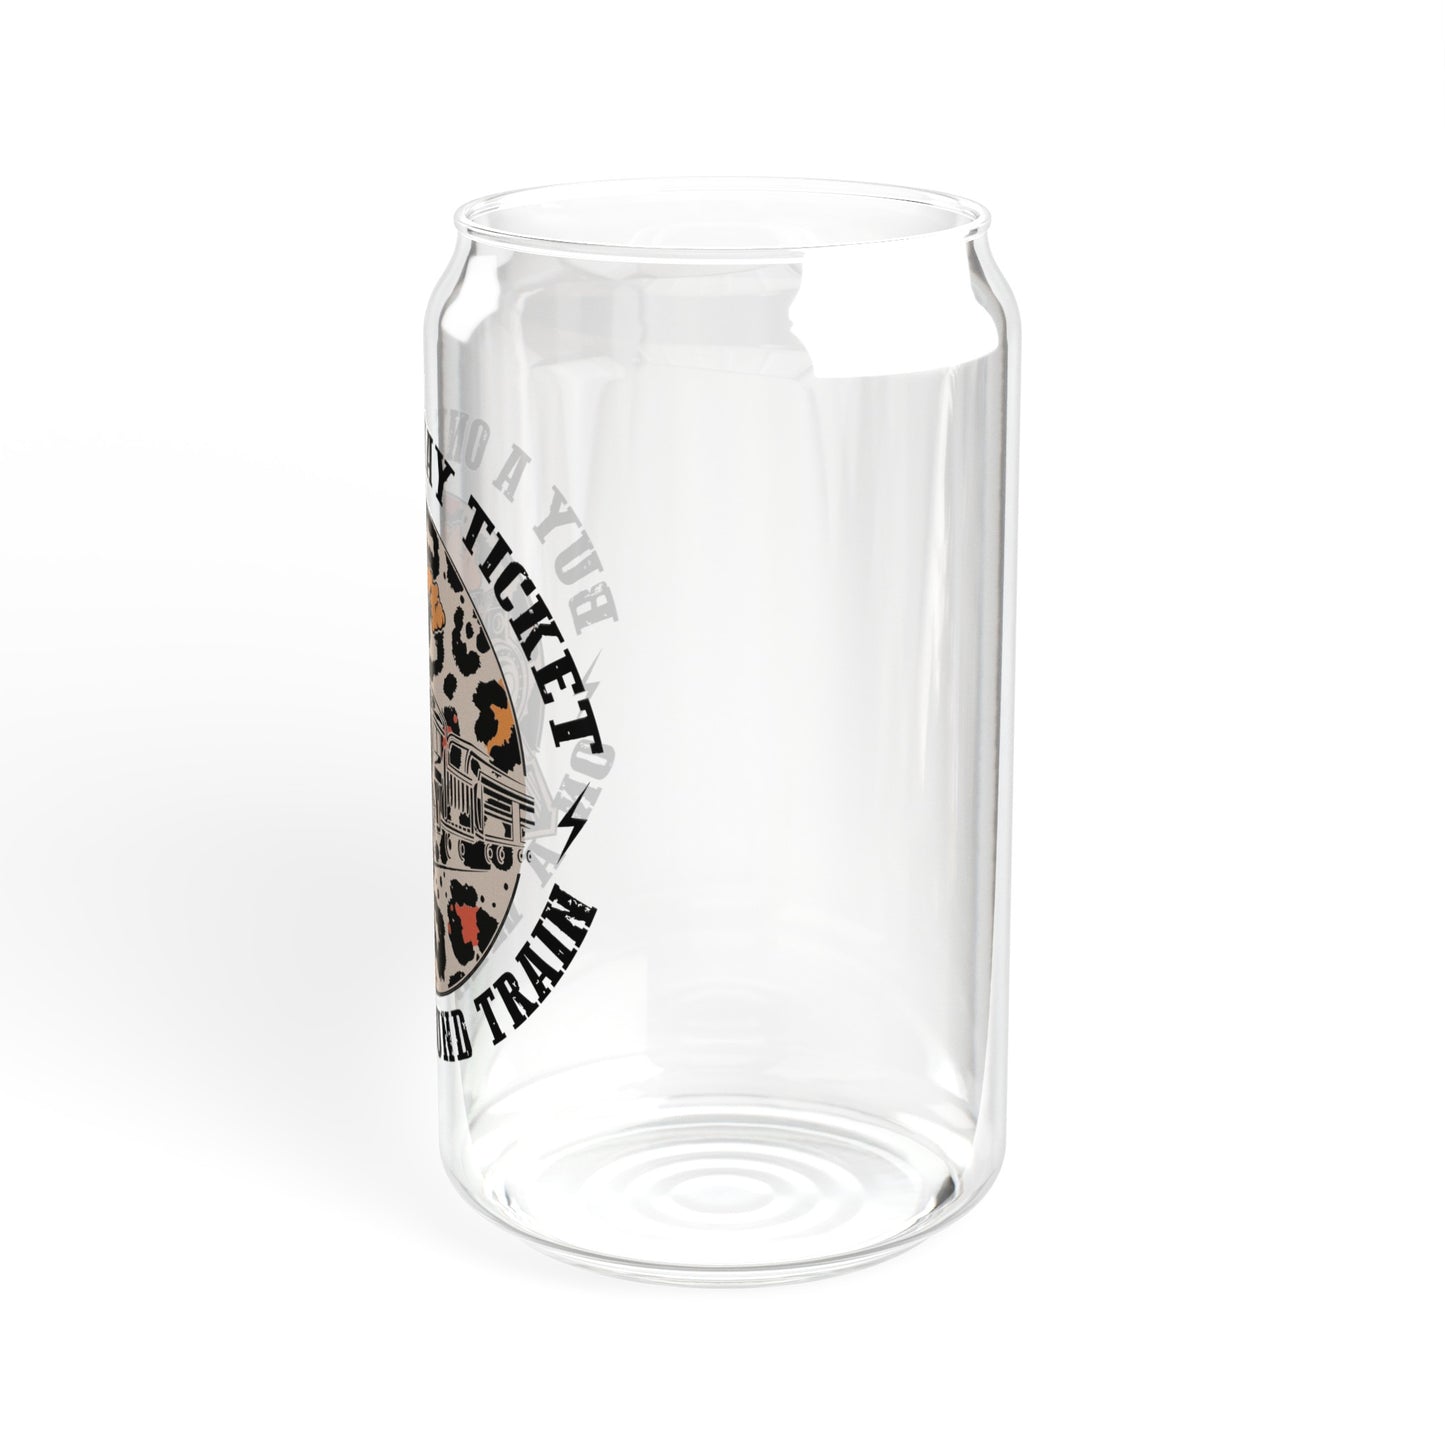 One Way Ticket - Sipper Glass, 16oz